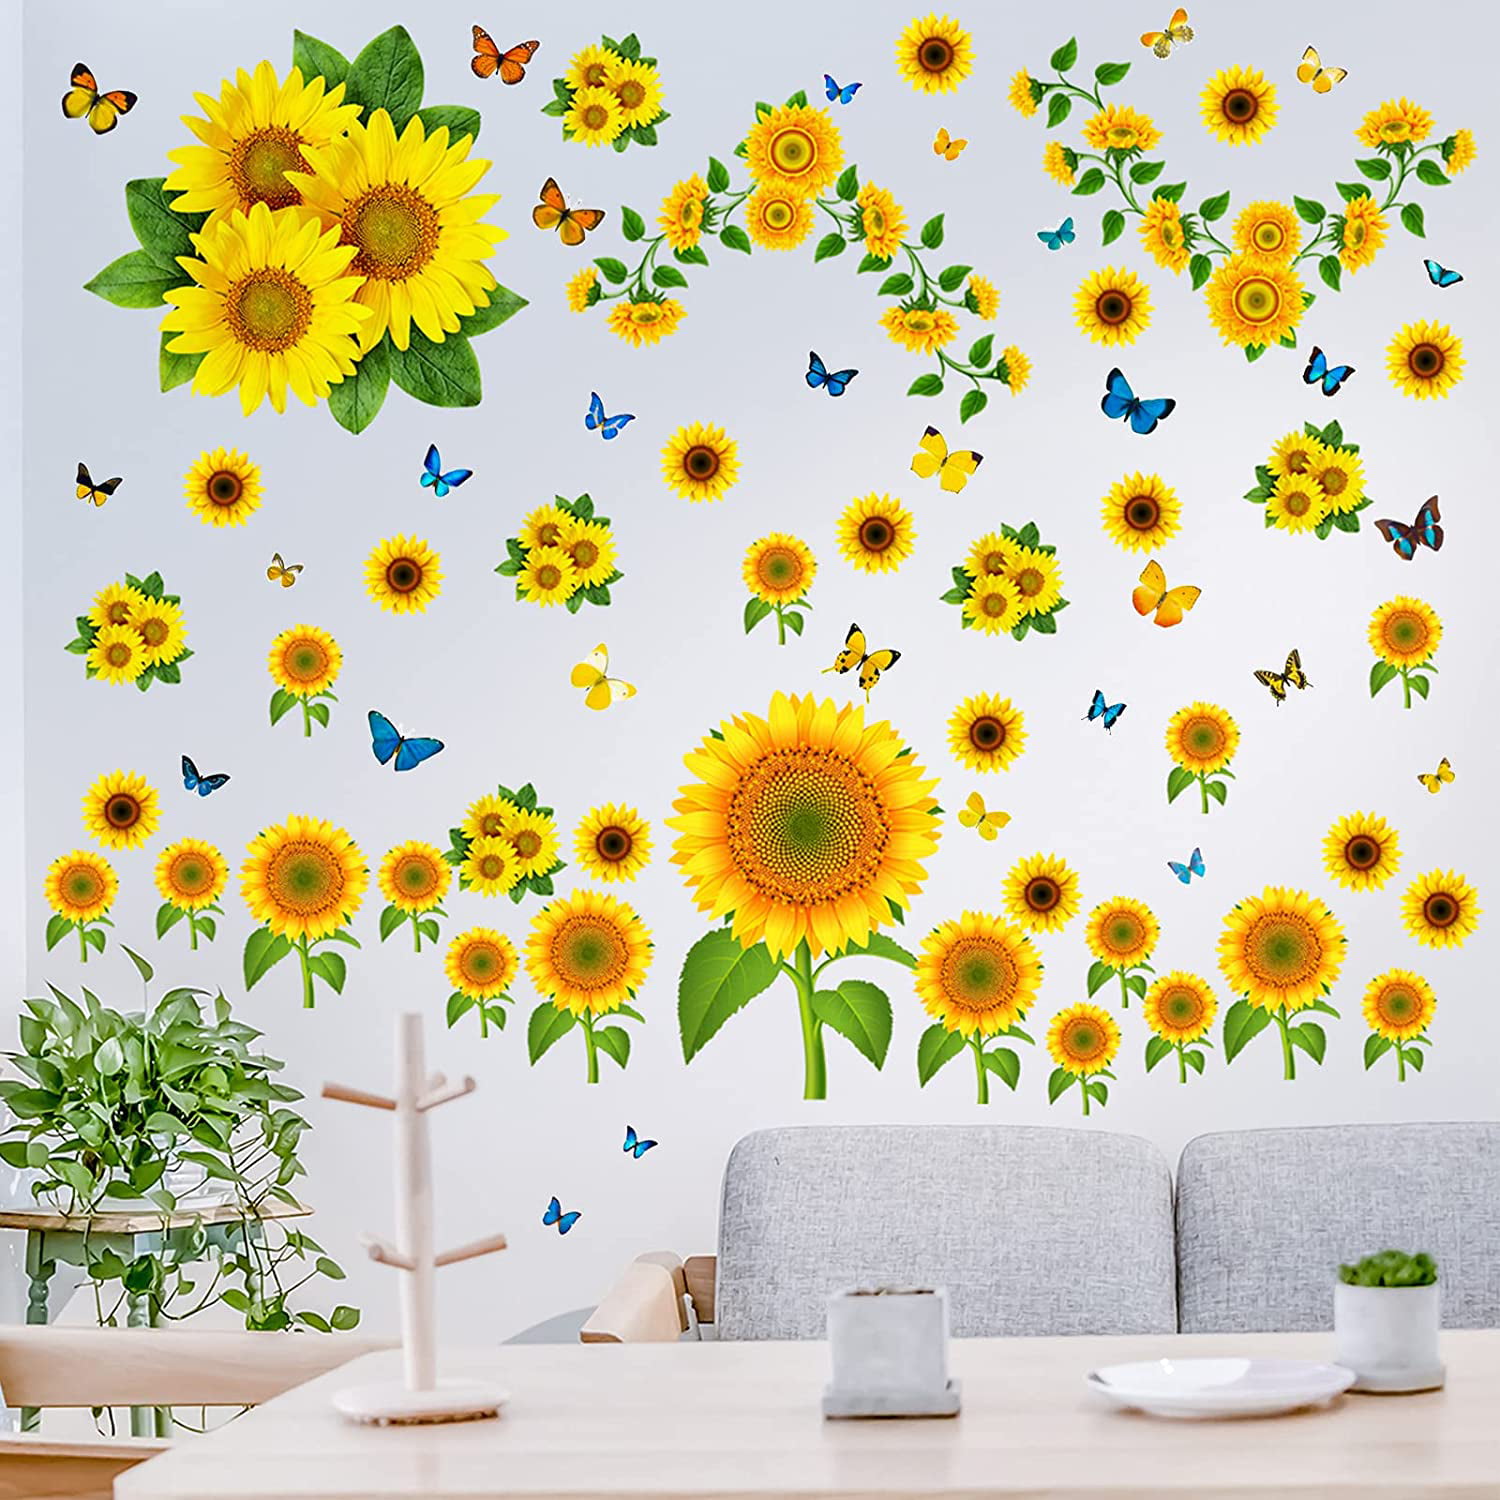 Daisy Flower Floral Wall Sticker Vinyl Decal for Girls Bed Room Decor 18pc 2Colr 